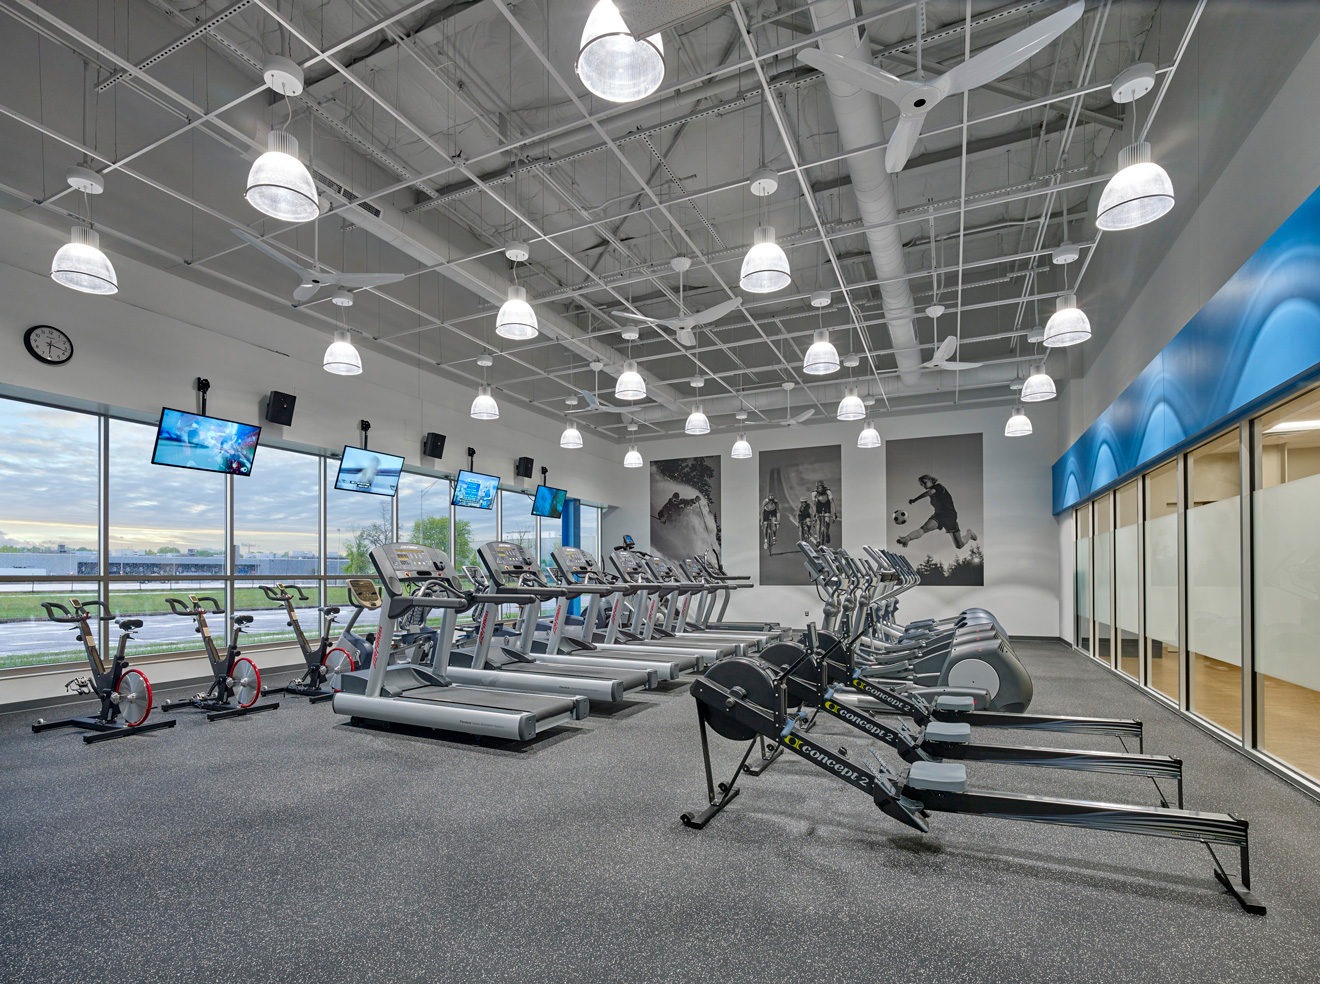 Boeing Fitness Center â€” Heckendorn Shiles Architects